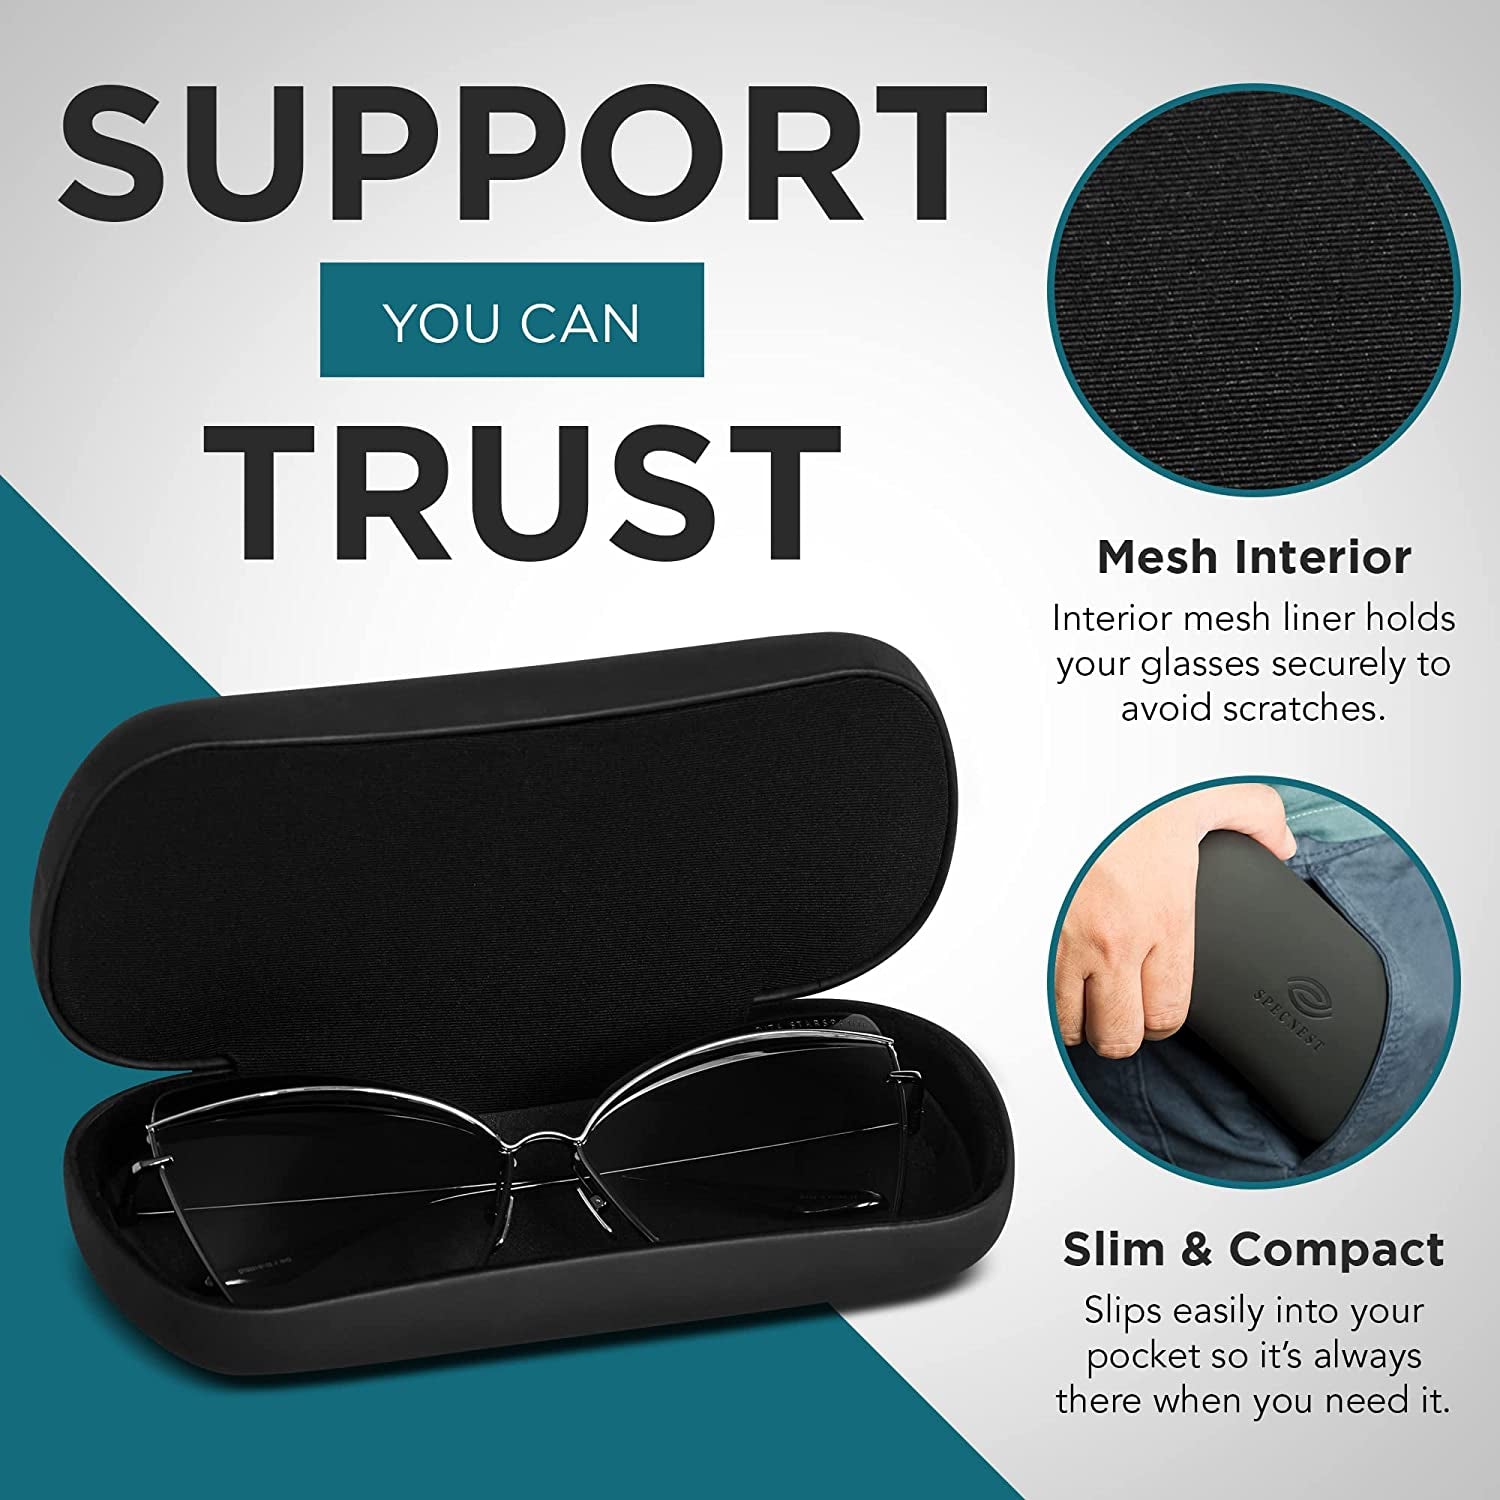 Specnest Sunglasses Case - Vegan Leather Sunglass Holder with Mesh Foam to Cradle Sunglasses Securely - Hard Eyeglass Case with Metal Construction - Designed by Optical Professionals